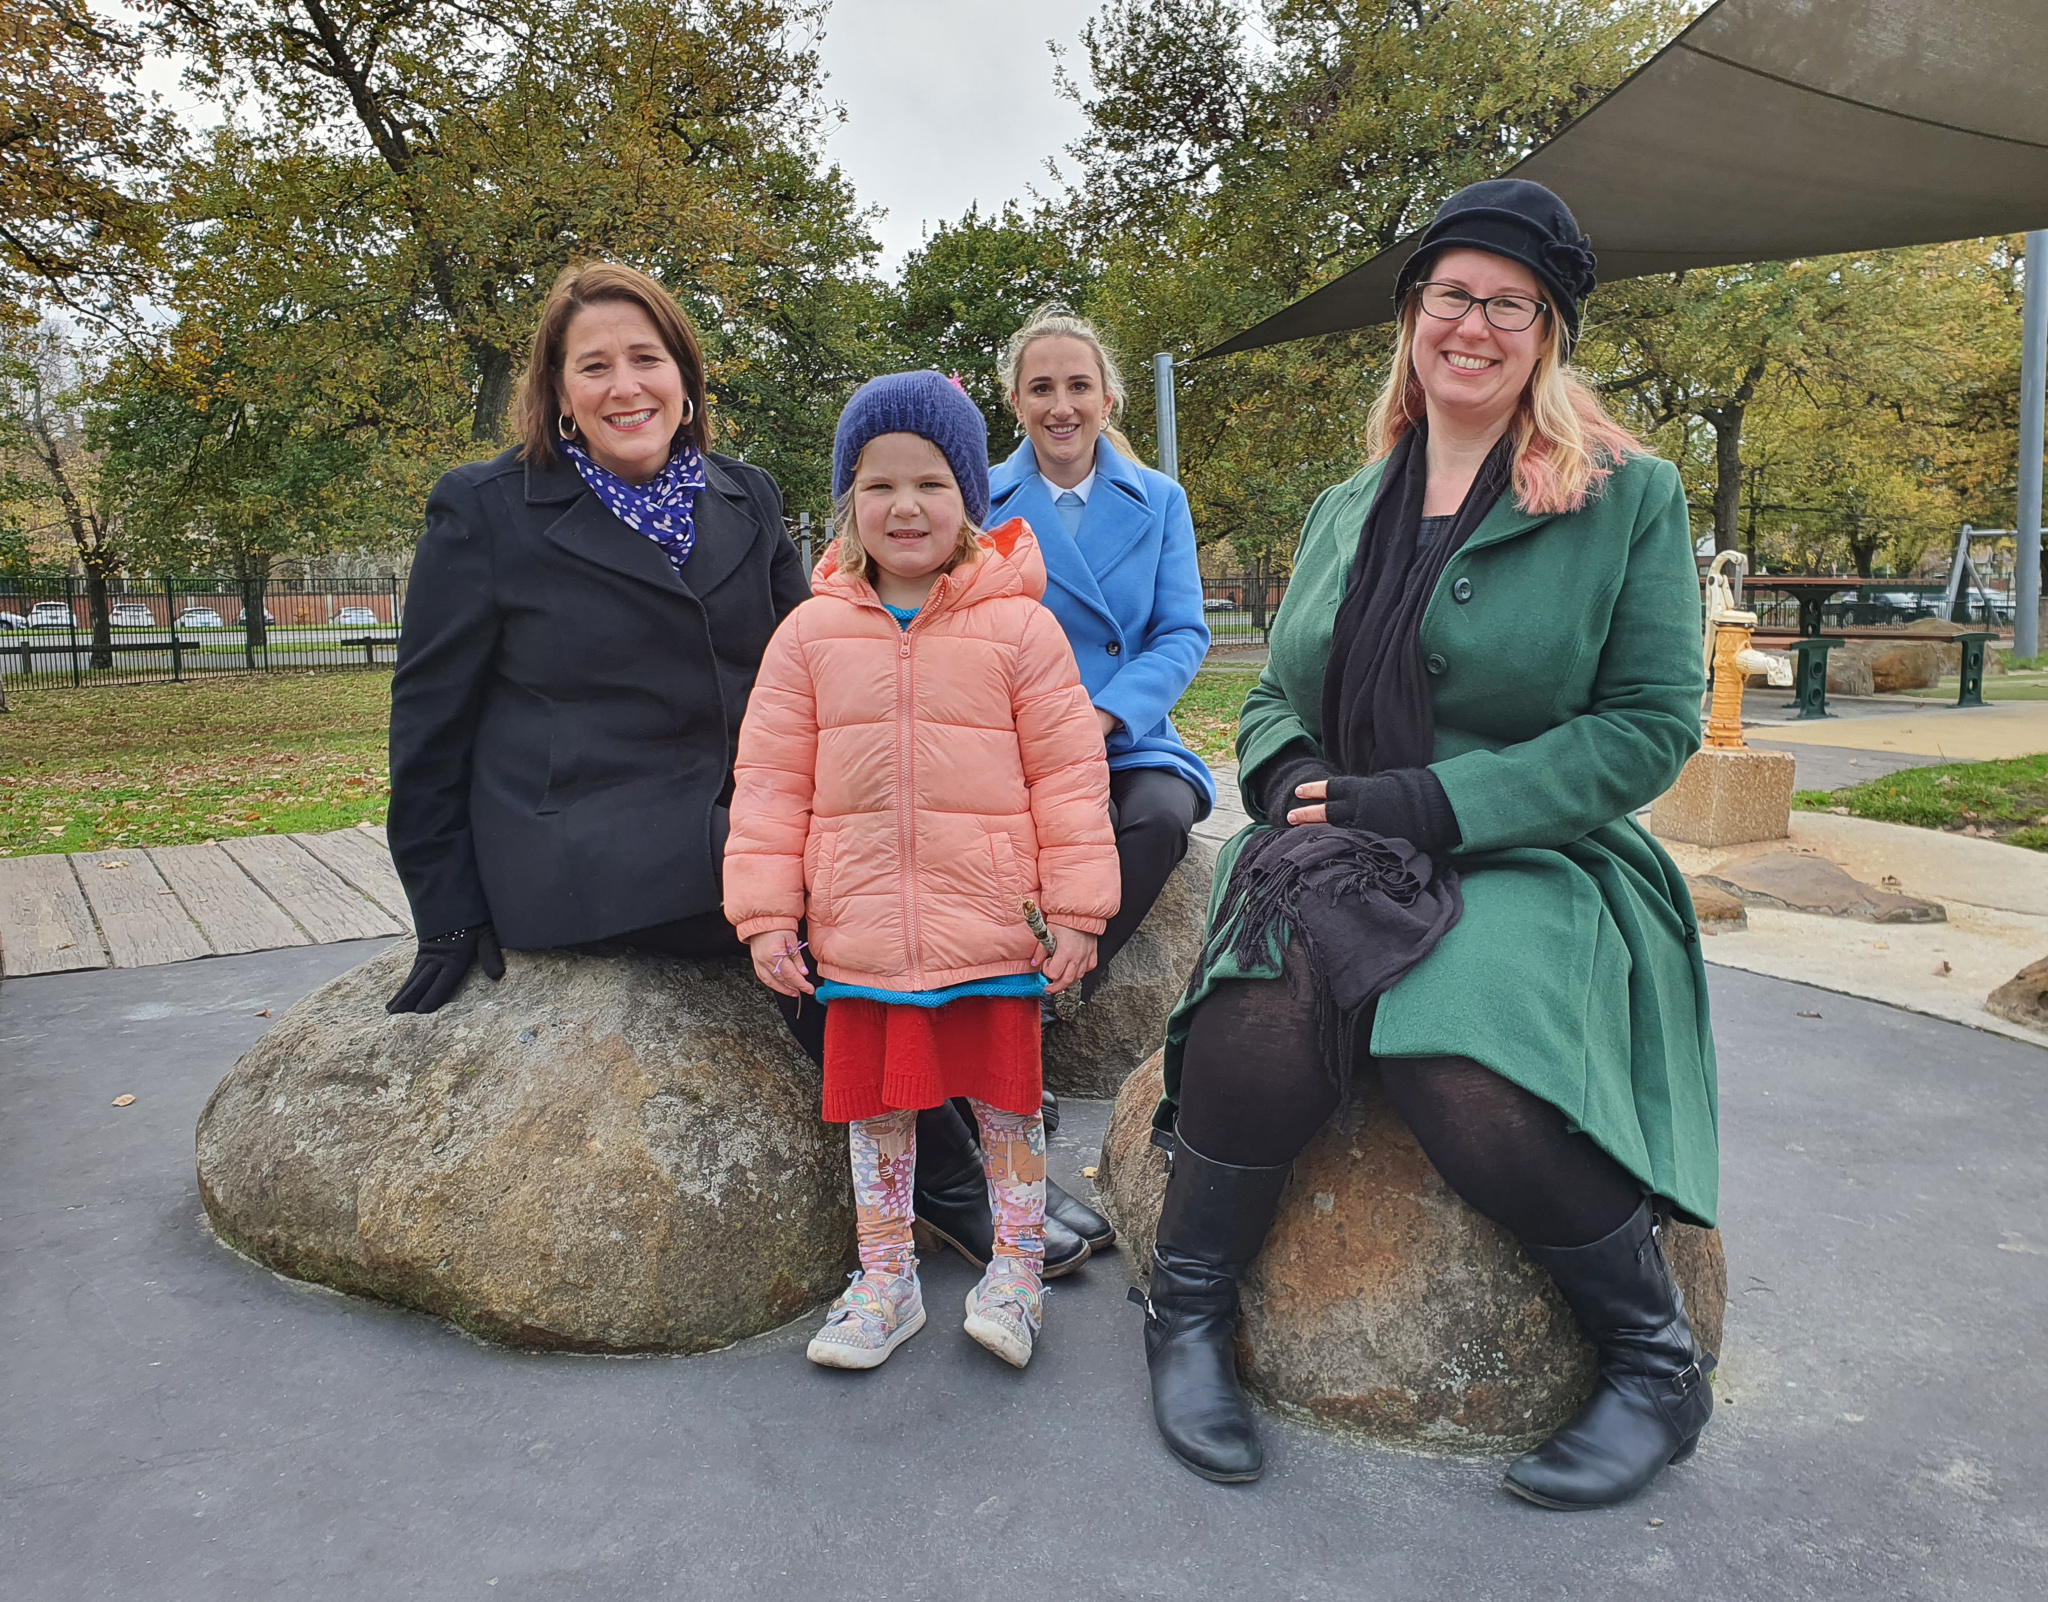 Julianna Addison, Cr Amy Johnson, and Bec Patton at the Victoria Park inclusive play space